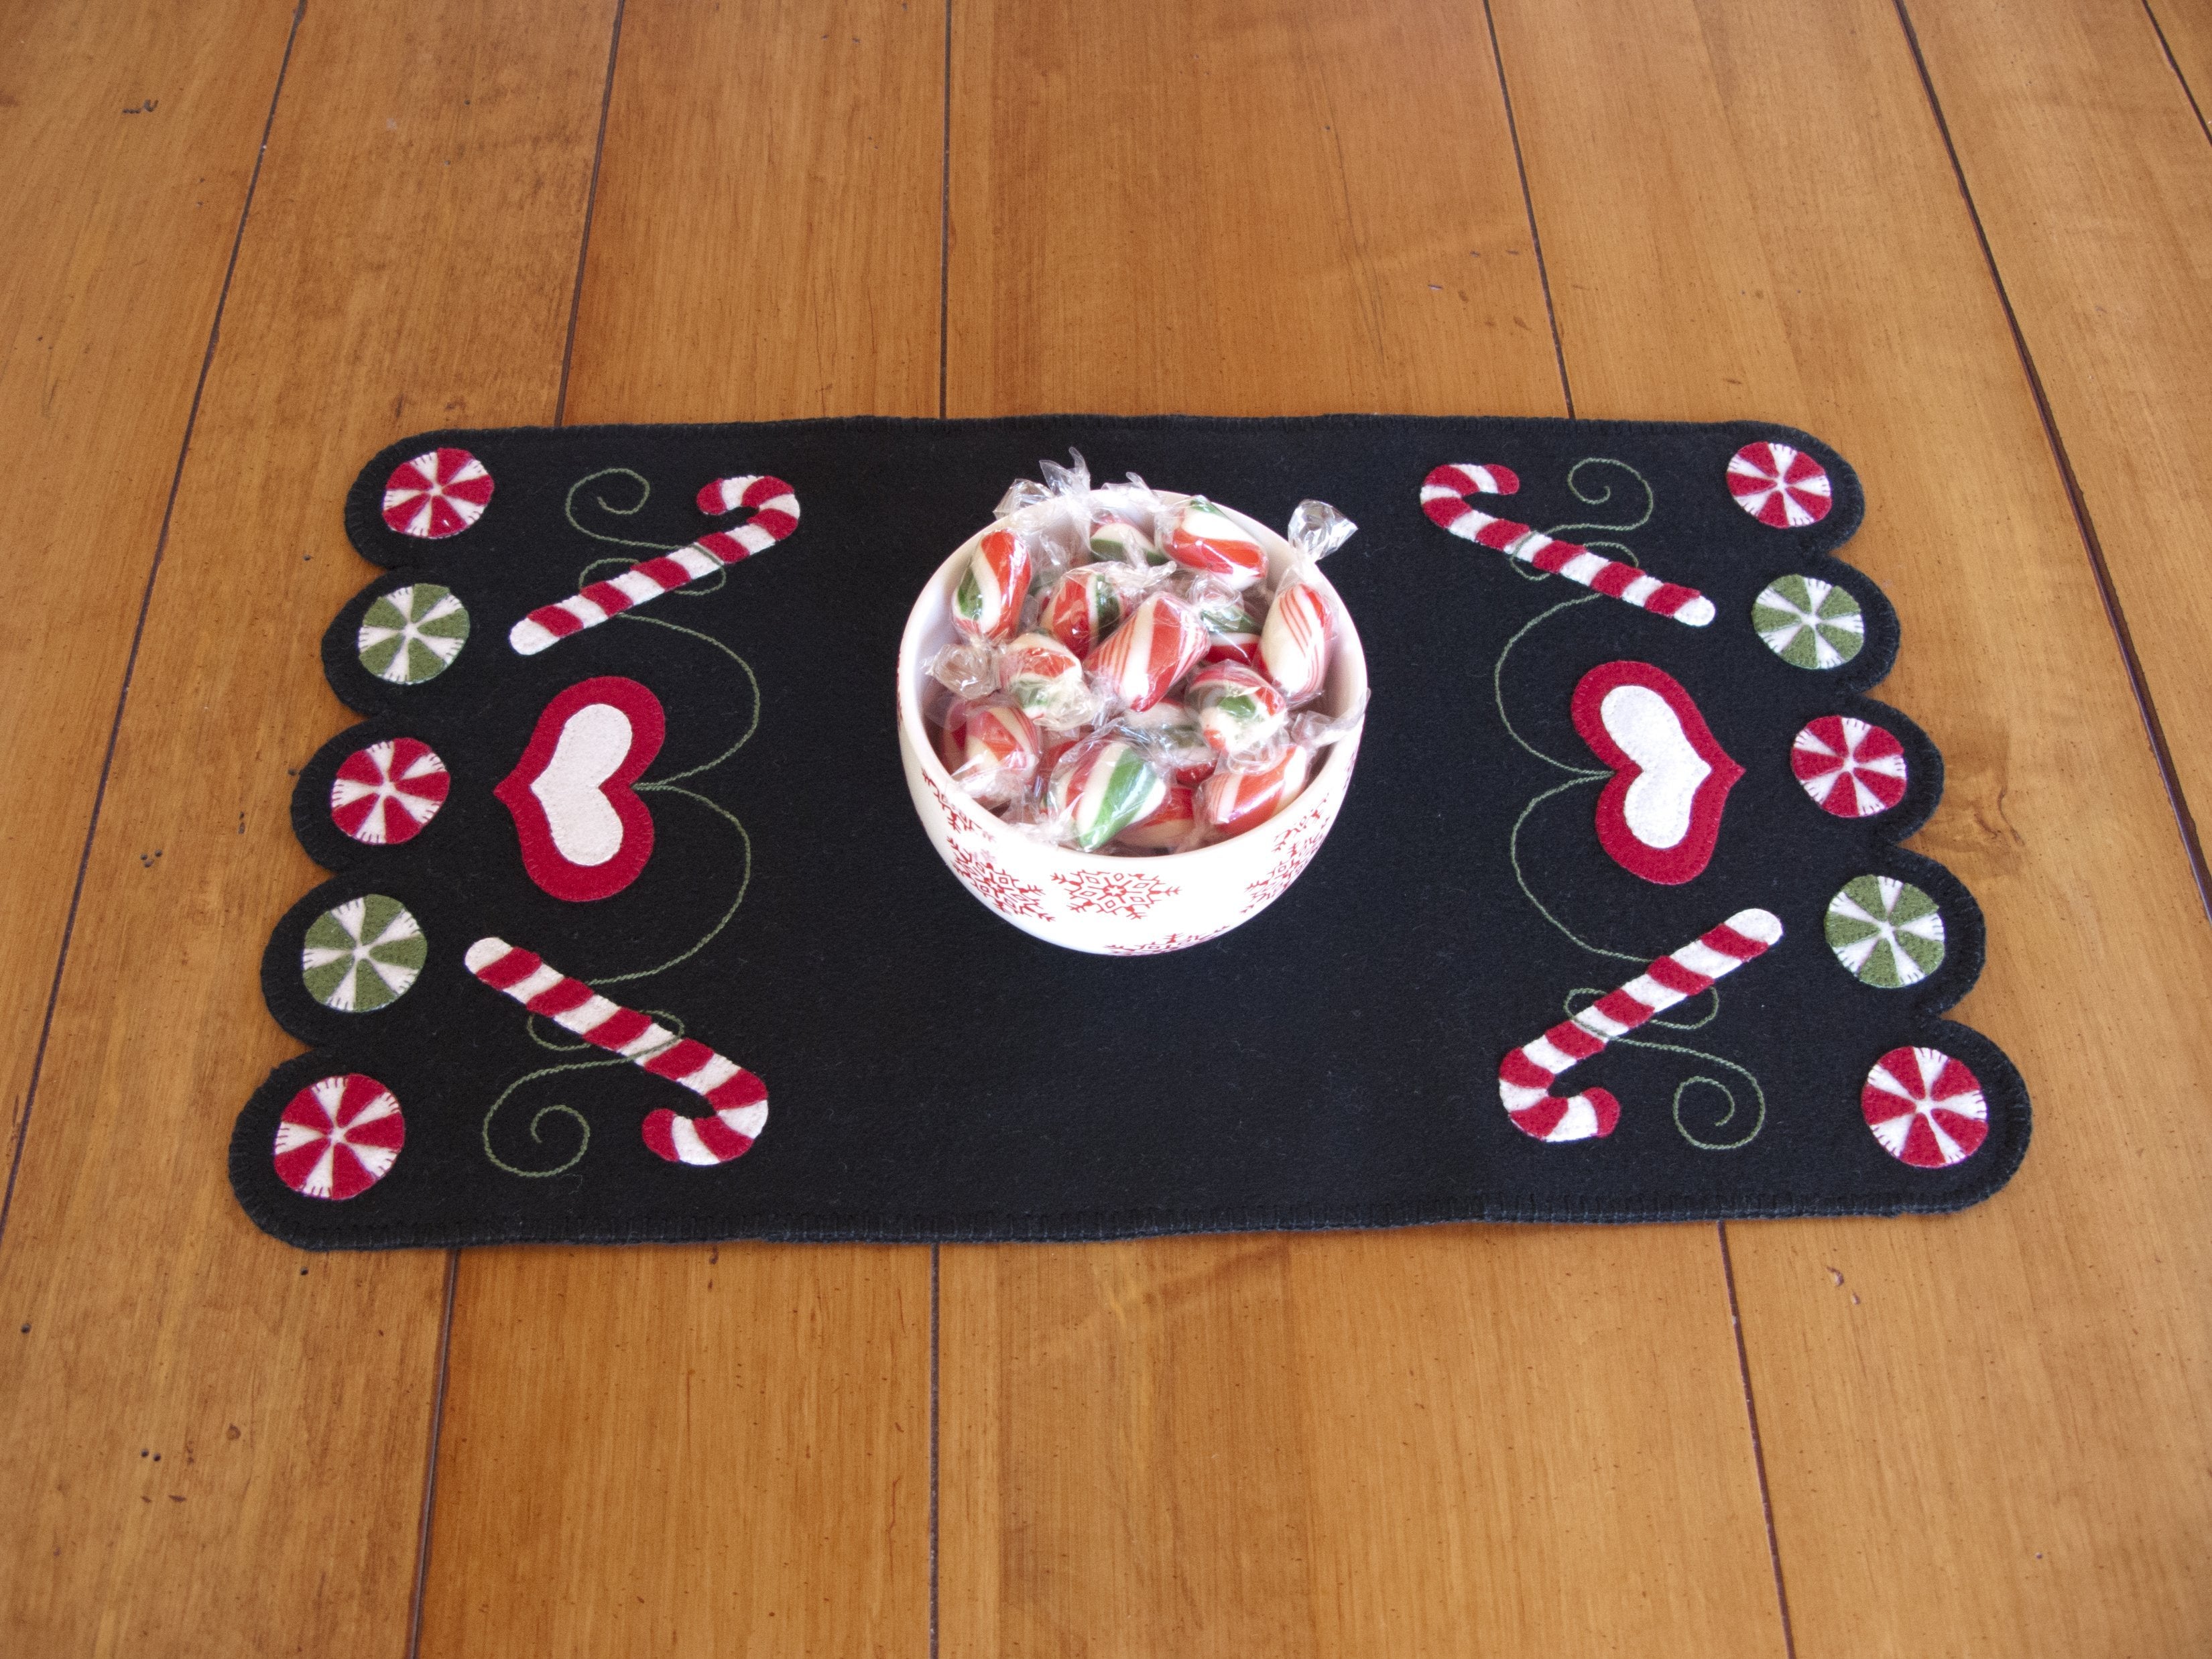 Christmas Candy Table Runner